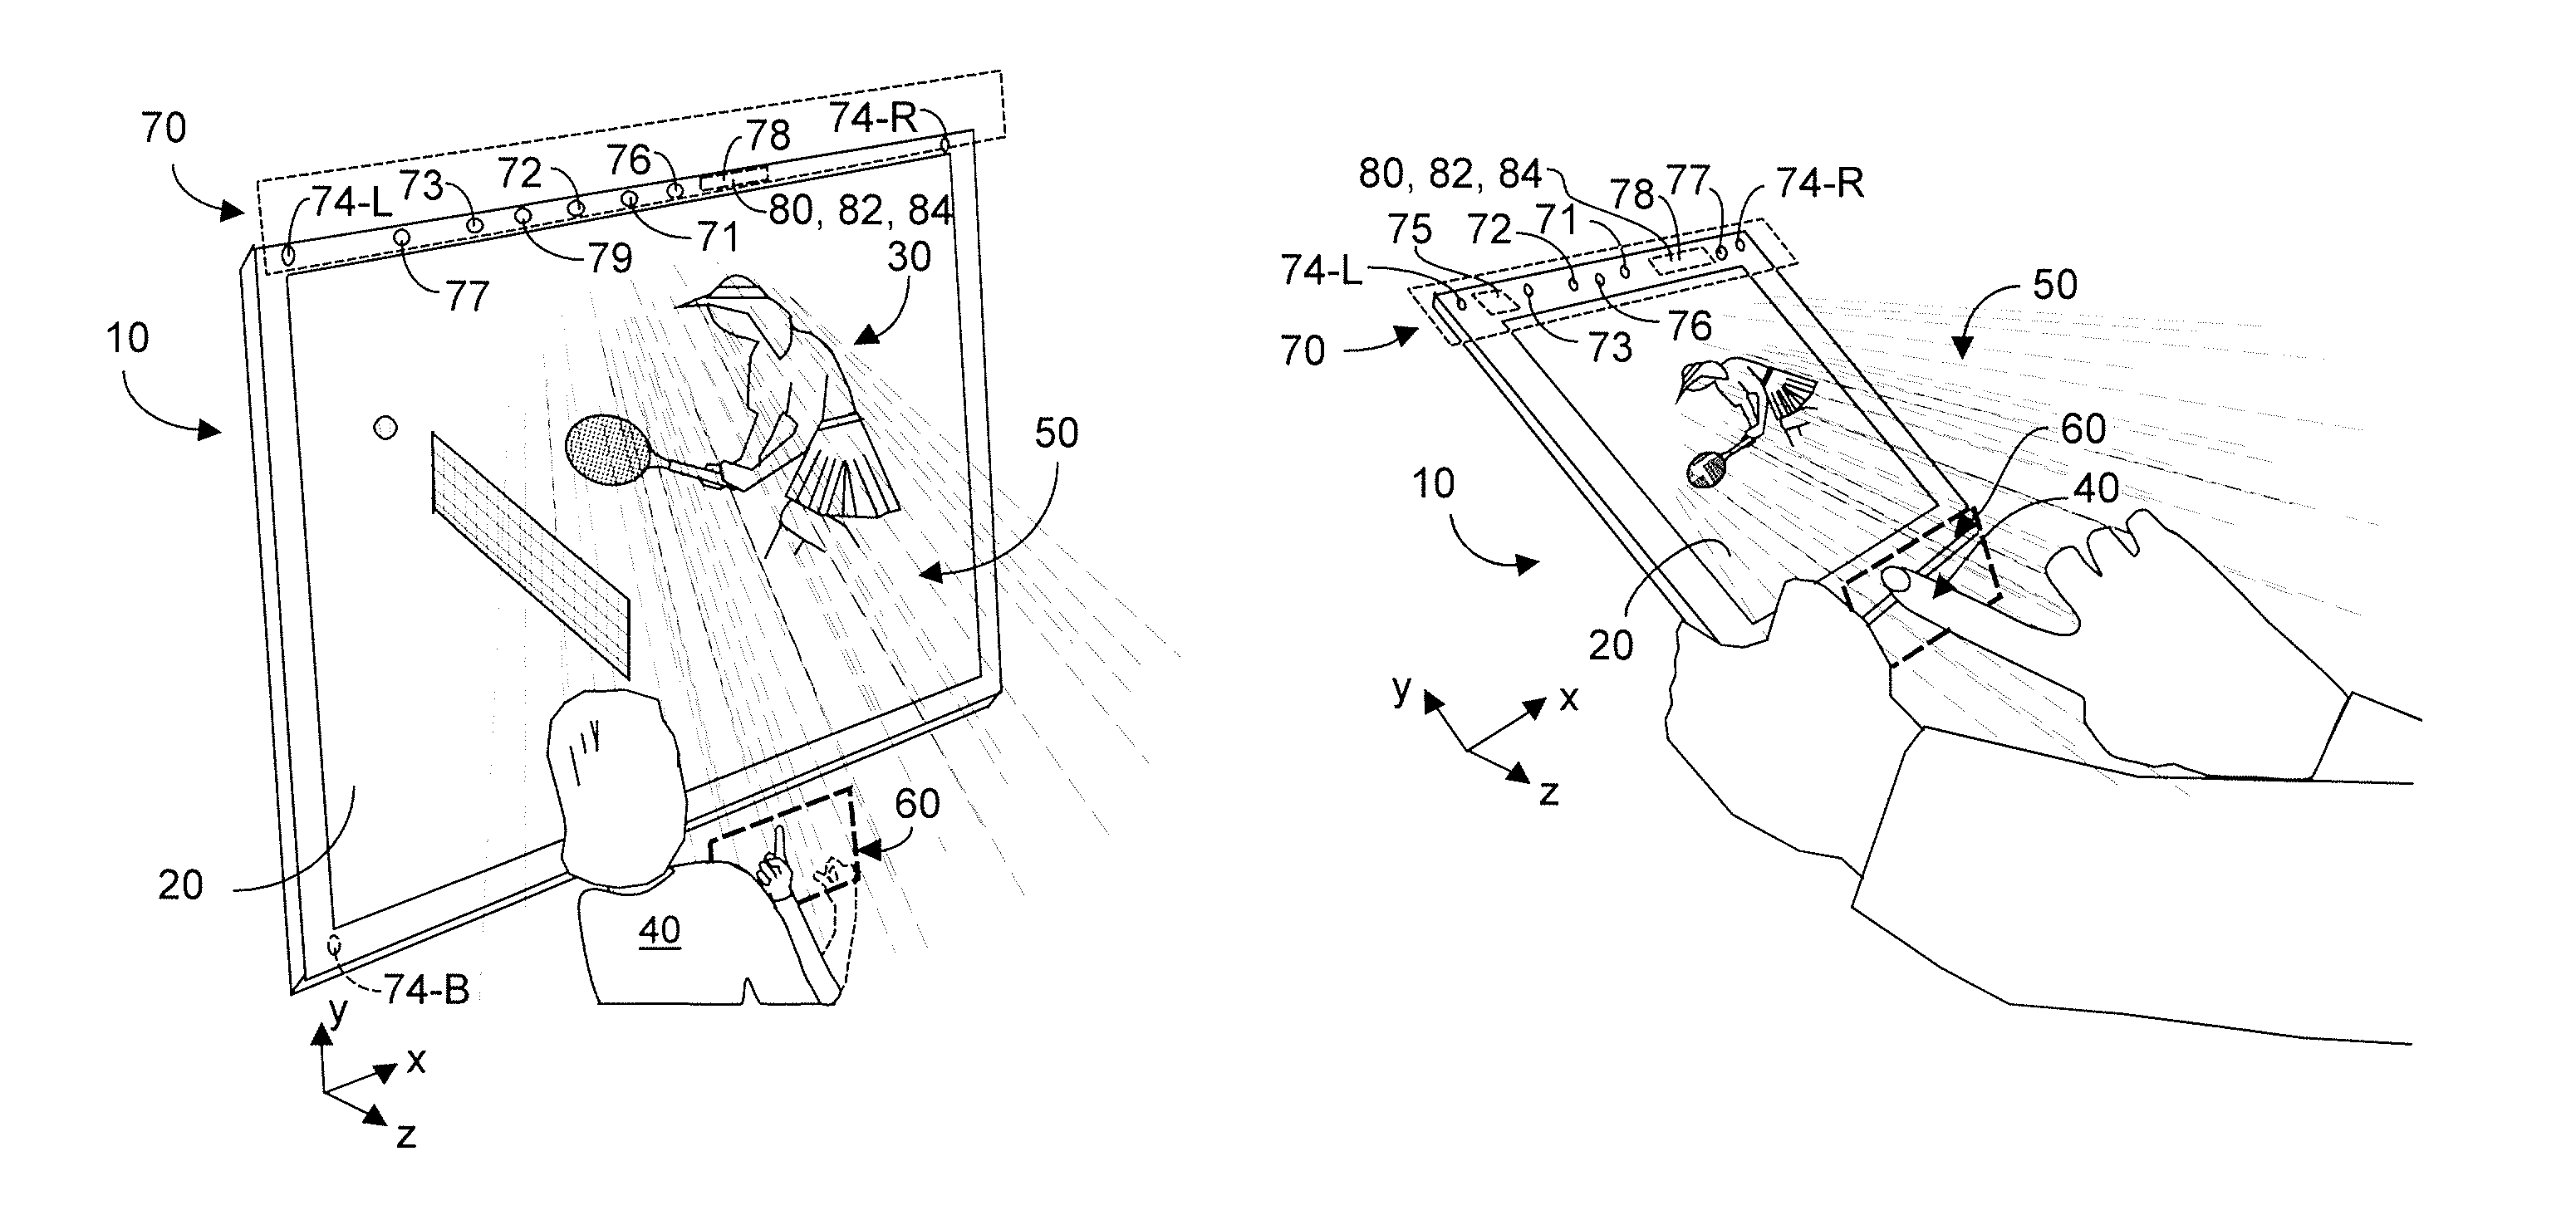 Method and system enabling natural user interface gestures with an electronic system